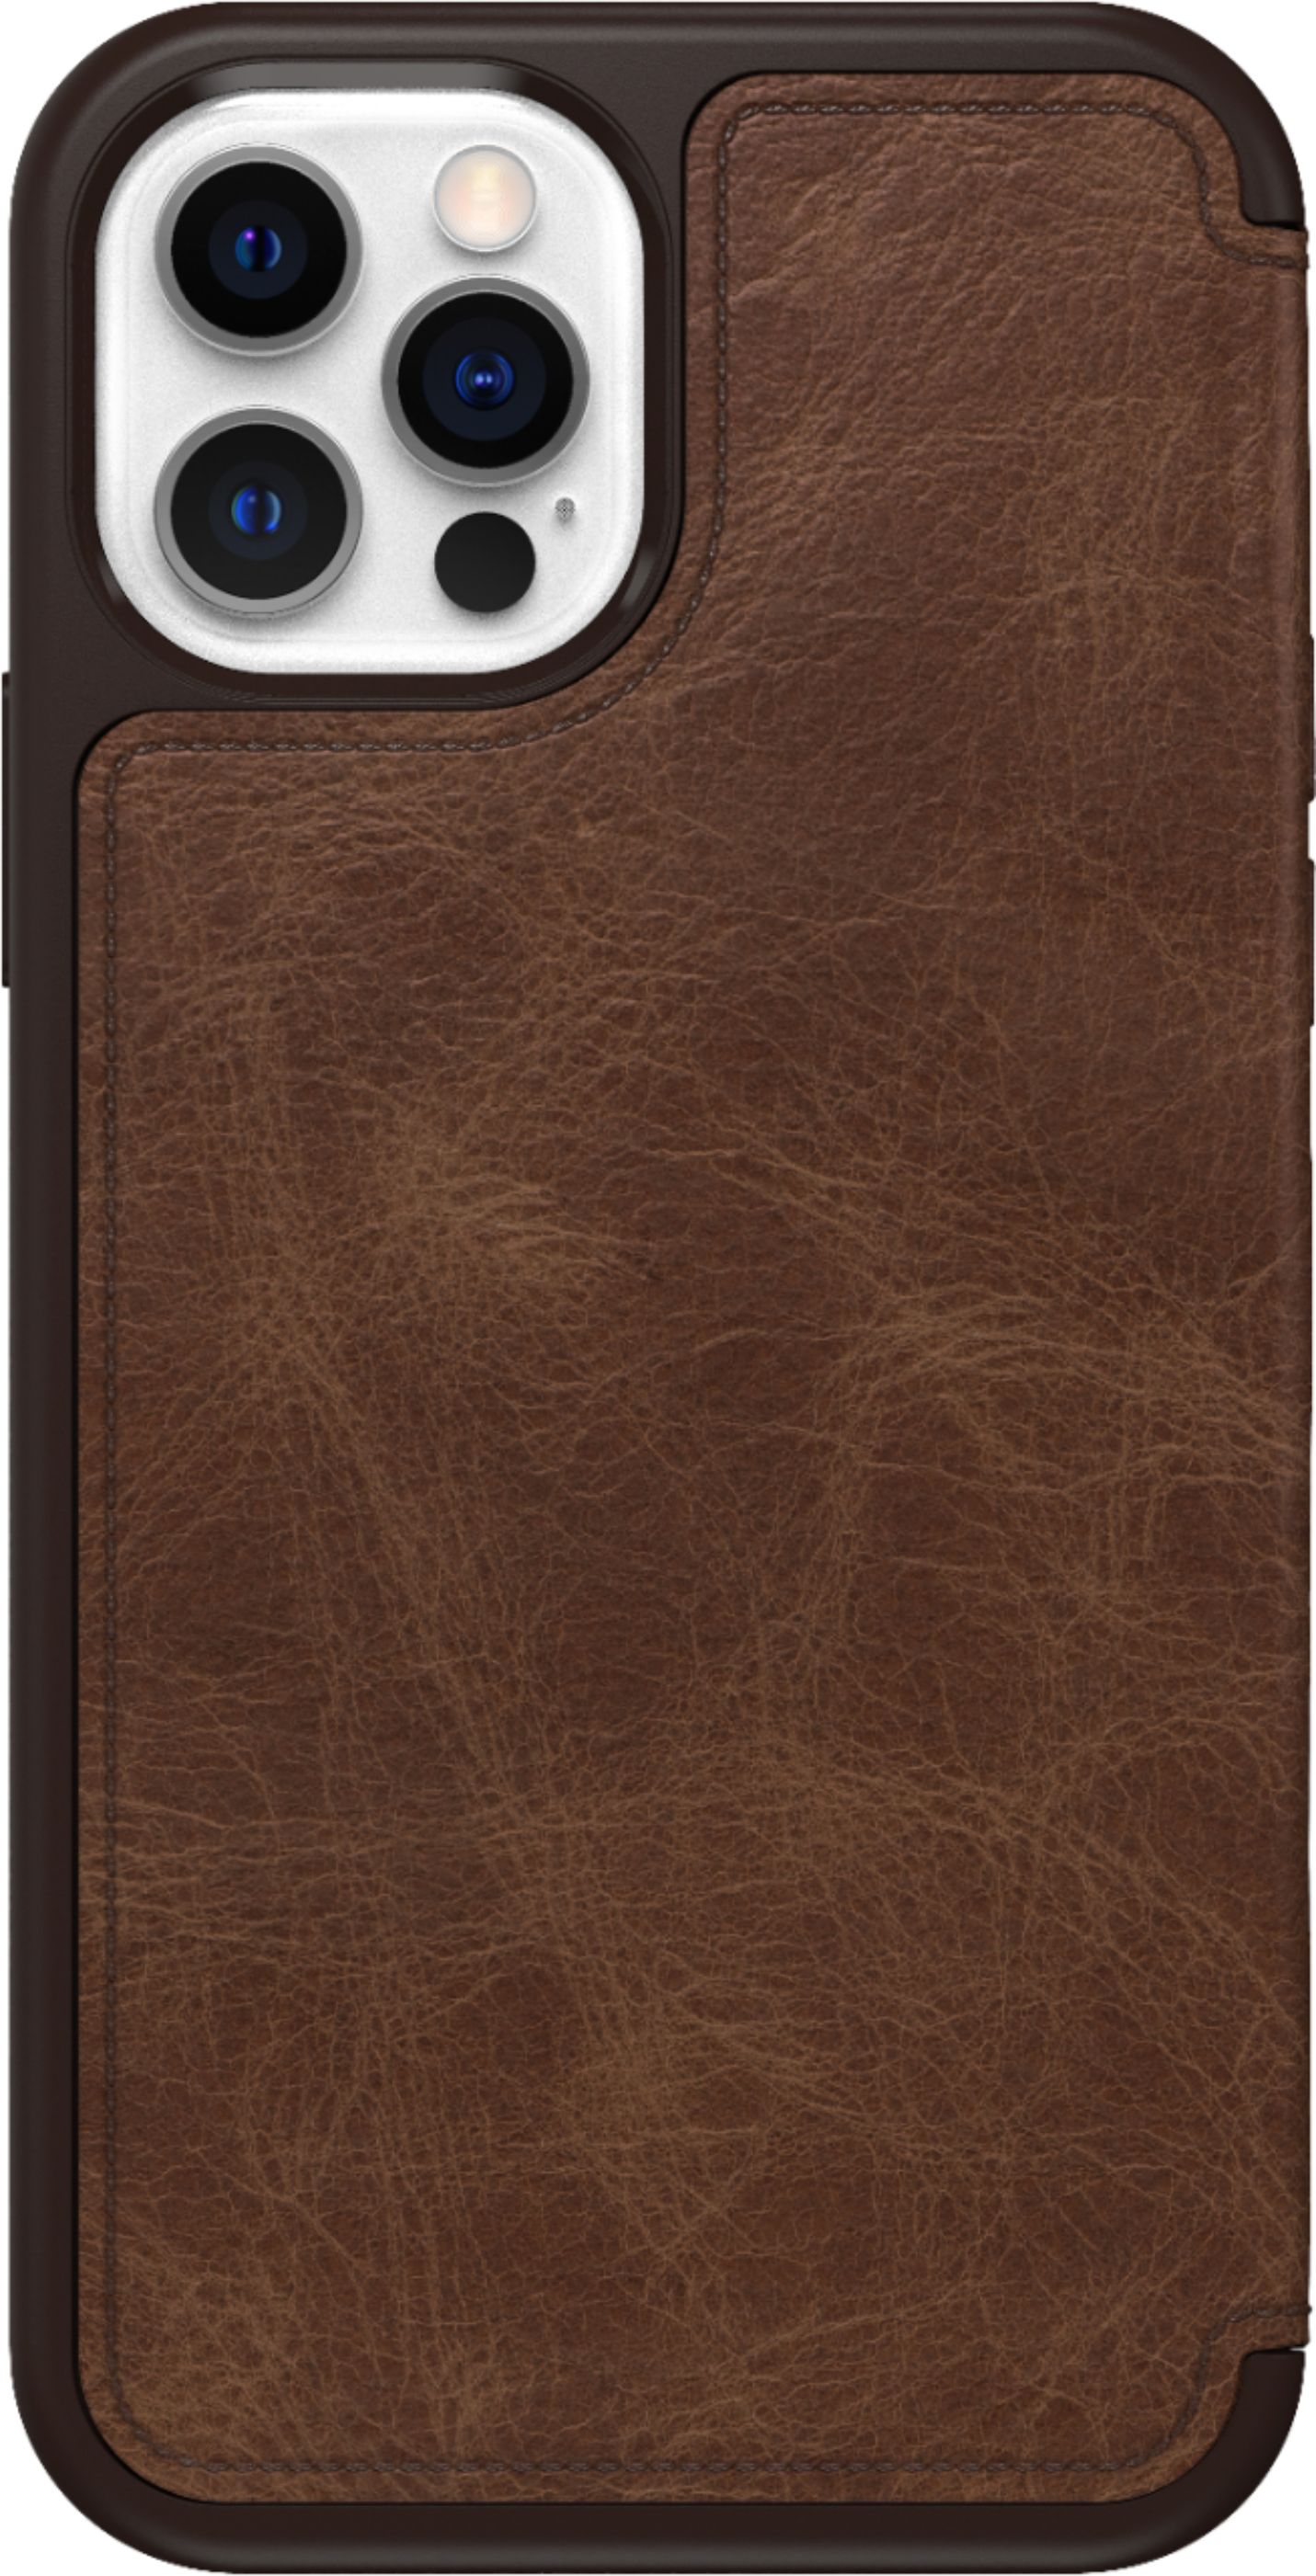  DAIZAG Case Compatible with iPhone 12 Pro Max,B Brown